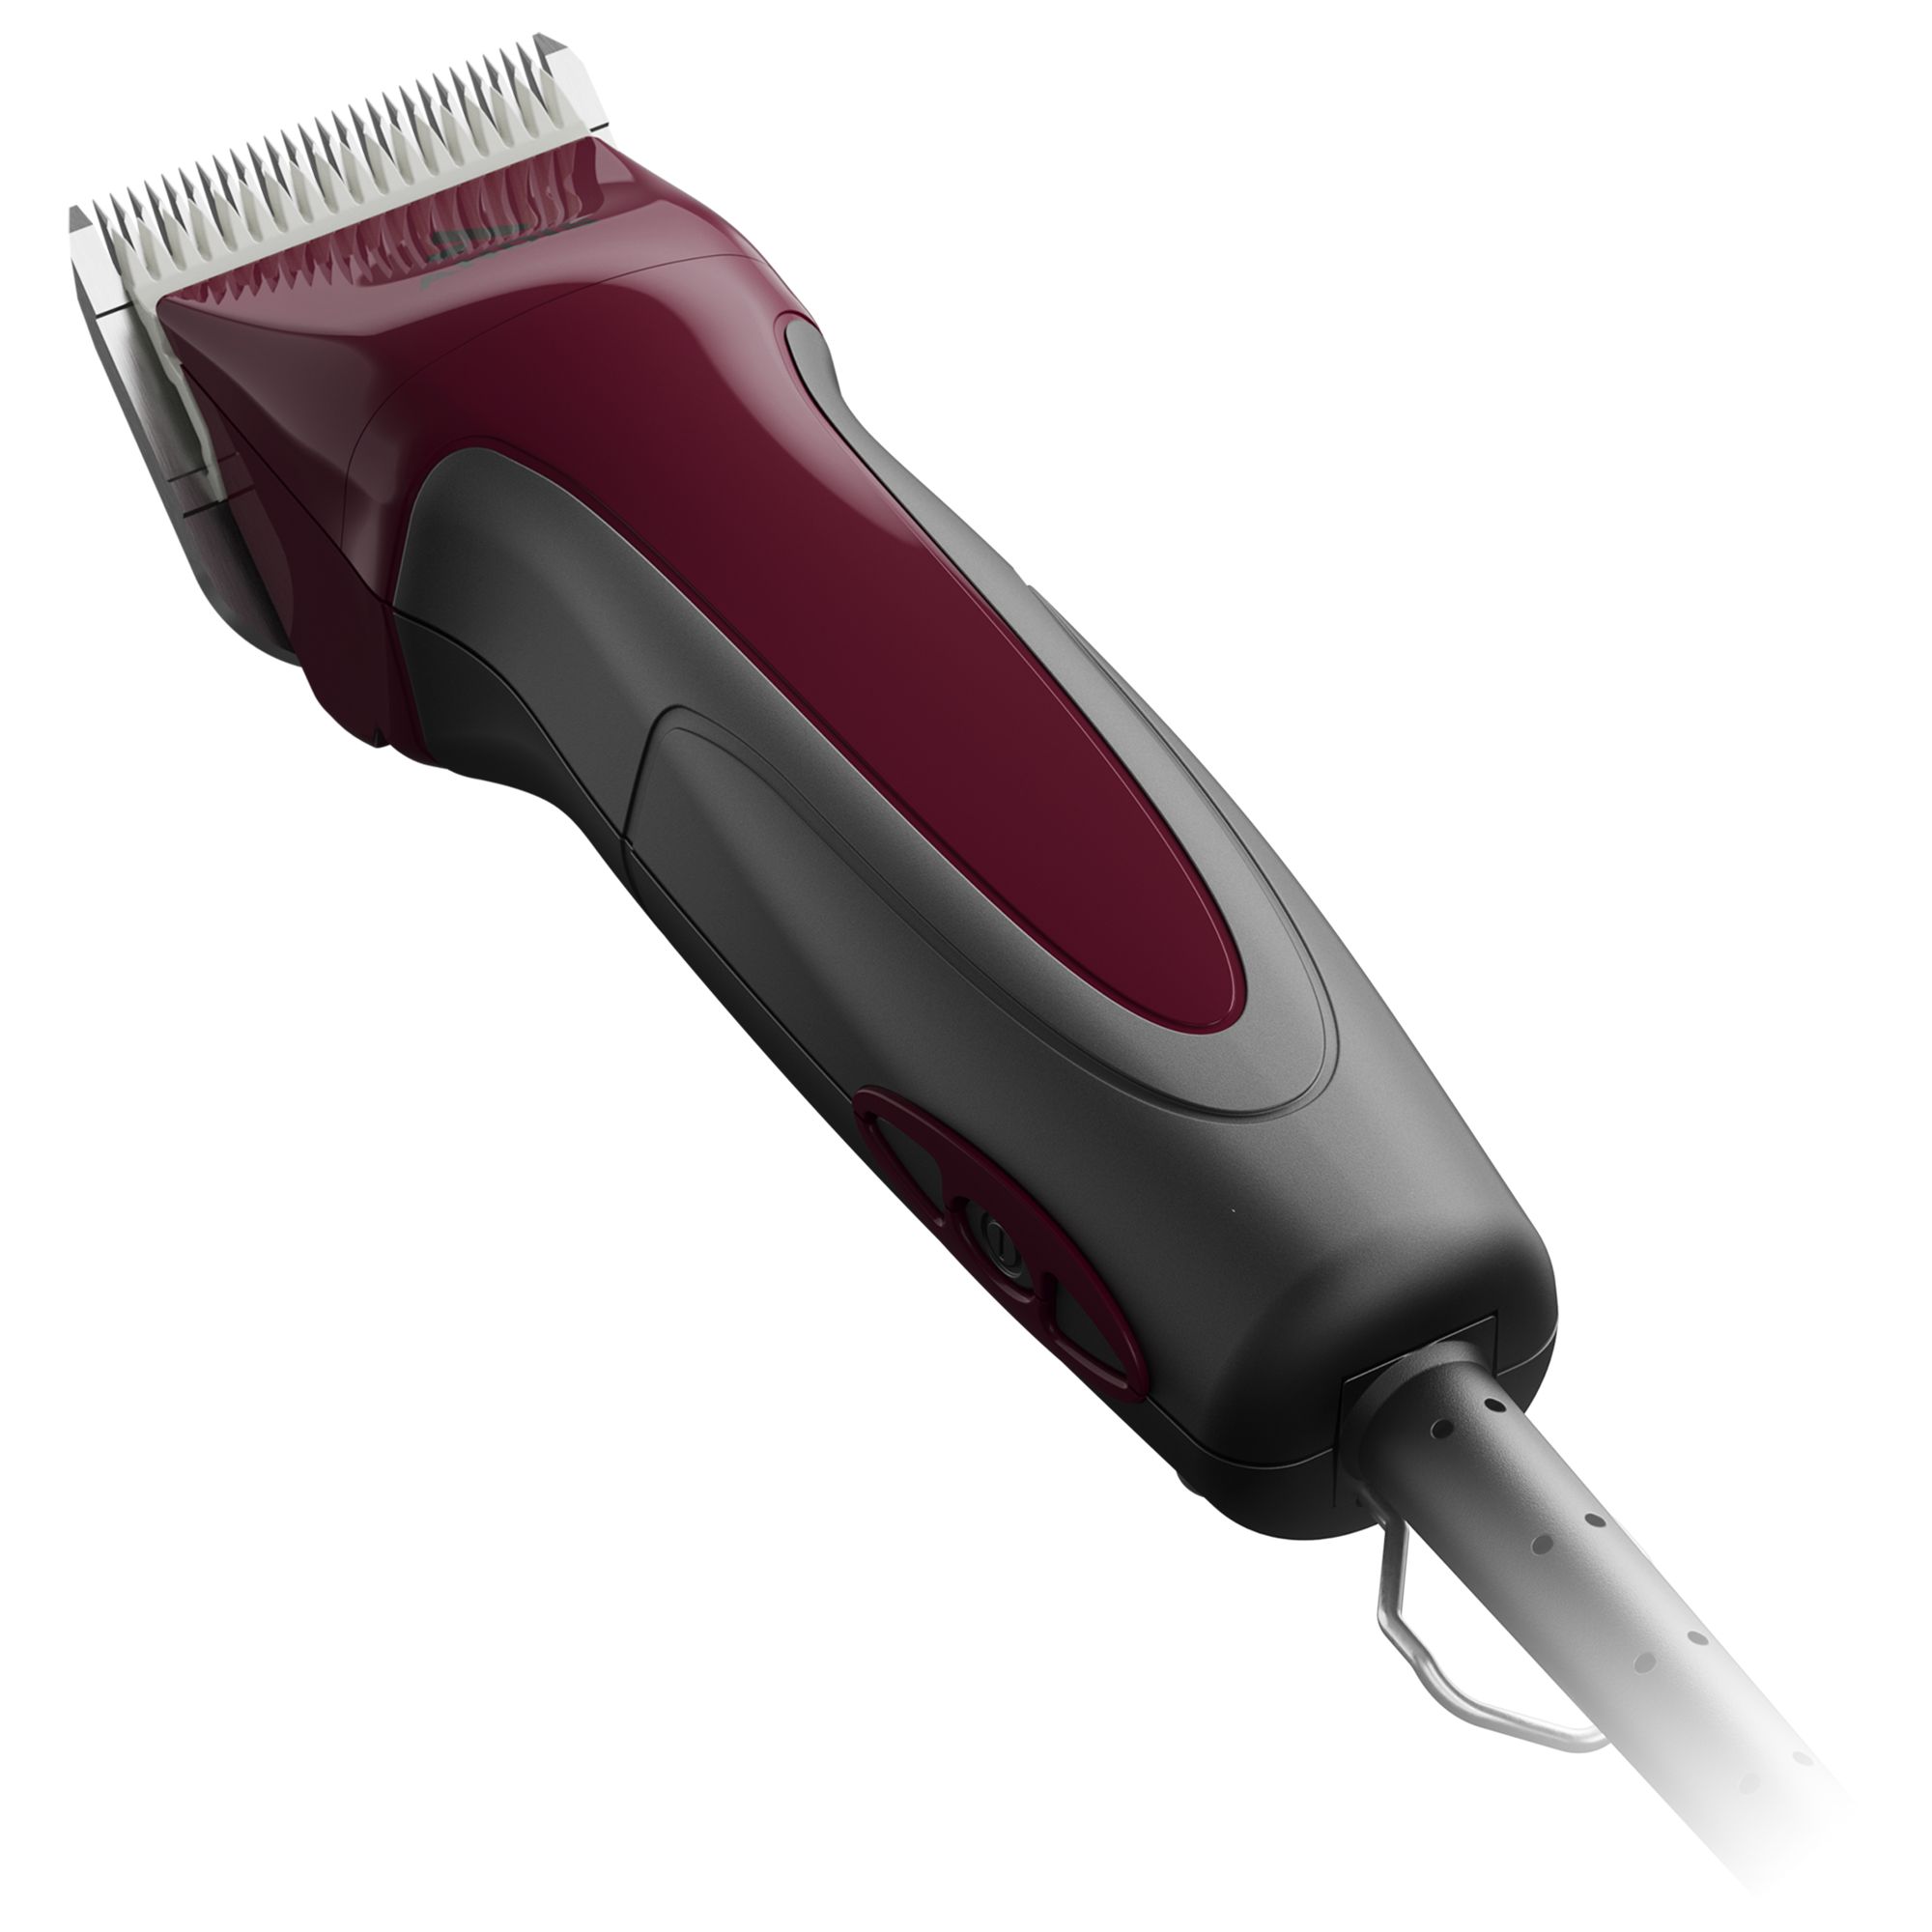 andis proclip speed detachable blade clipper